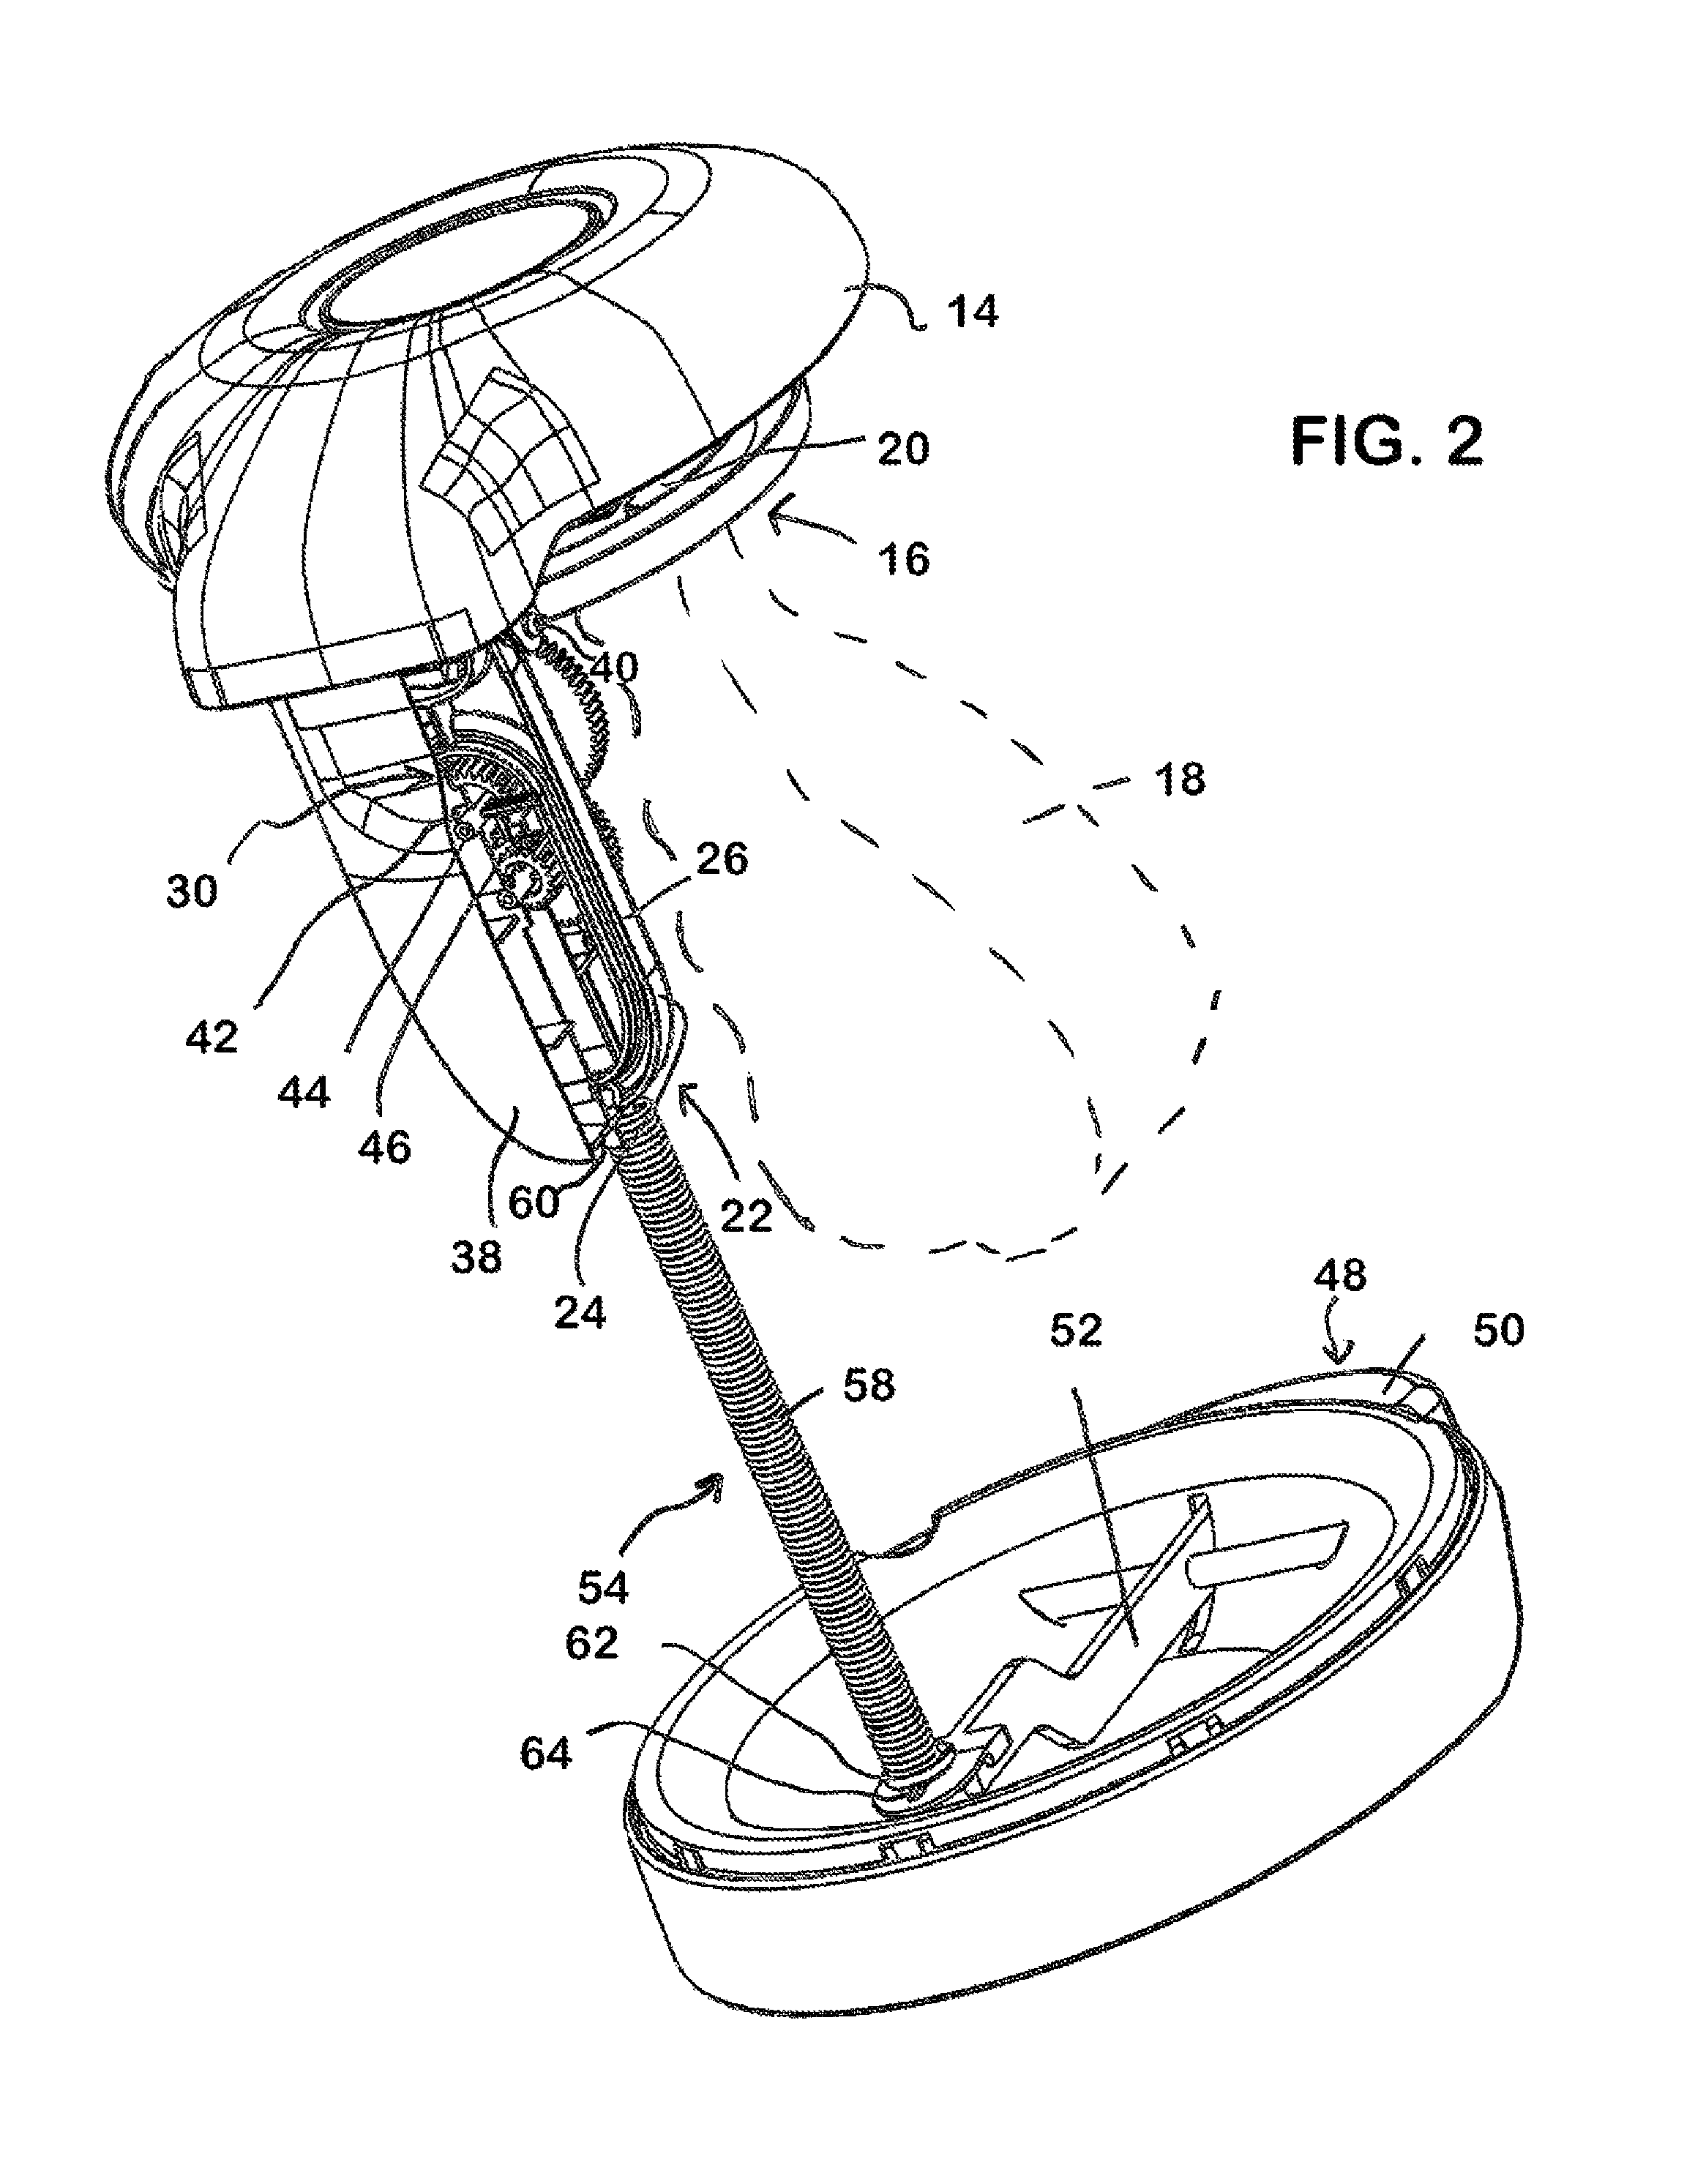 Medical waste disposal device with self-closing lid